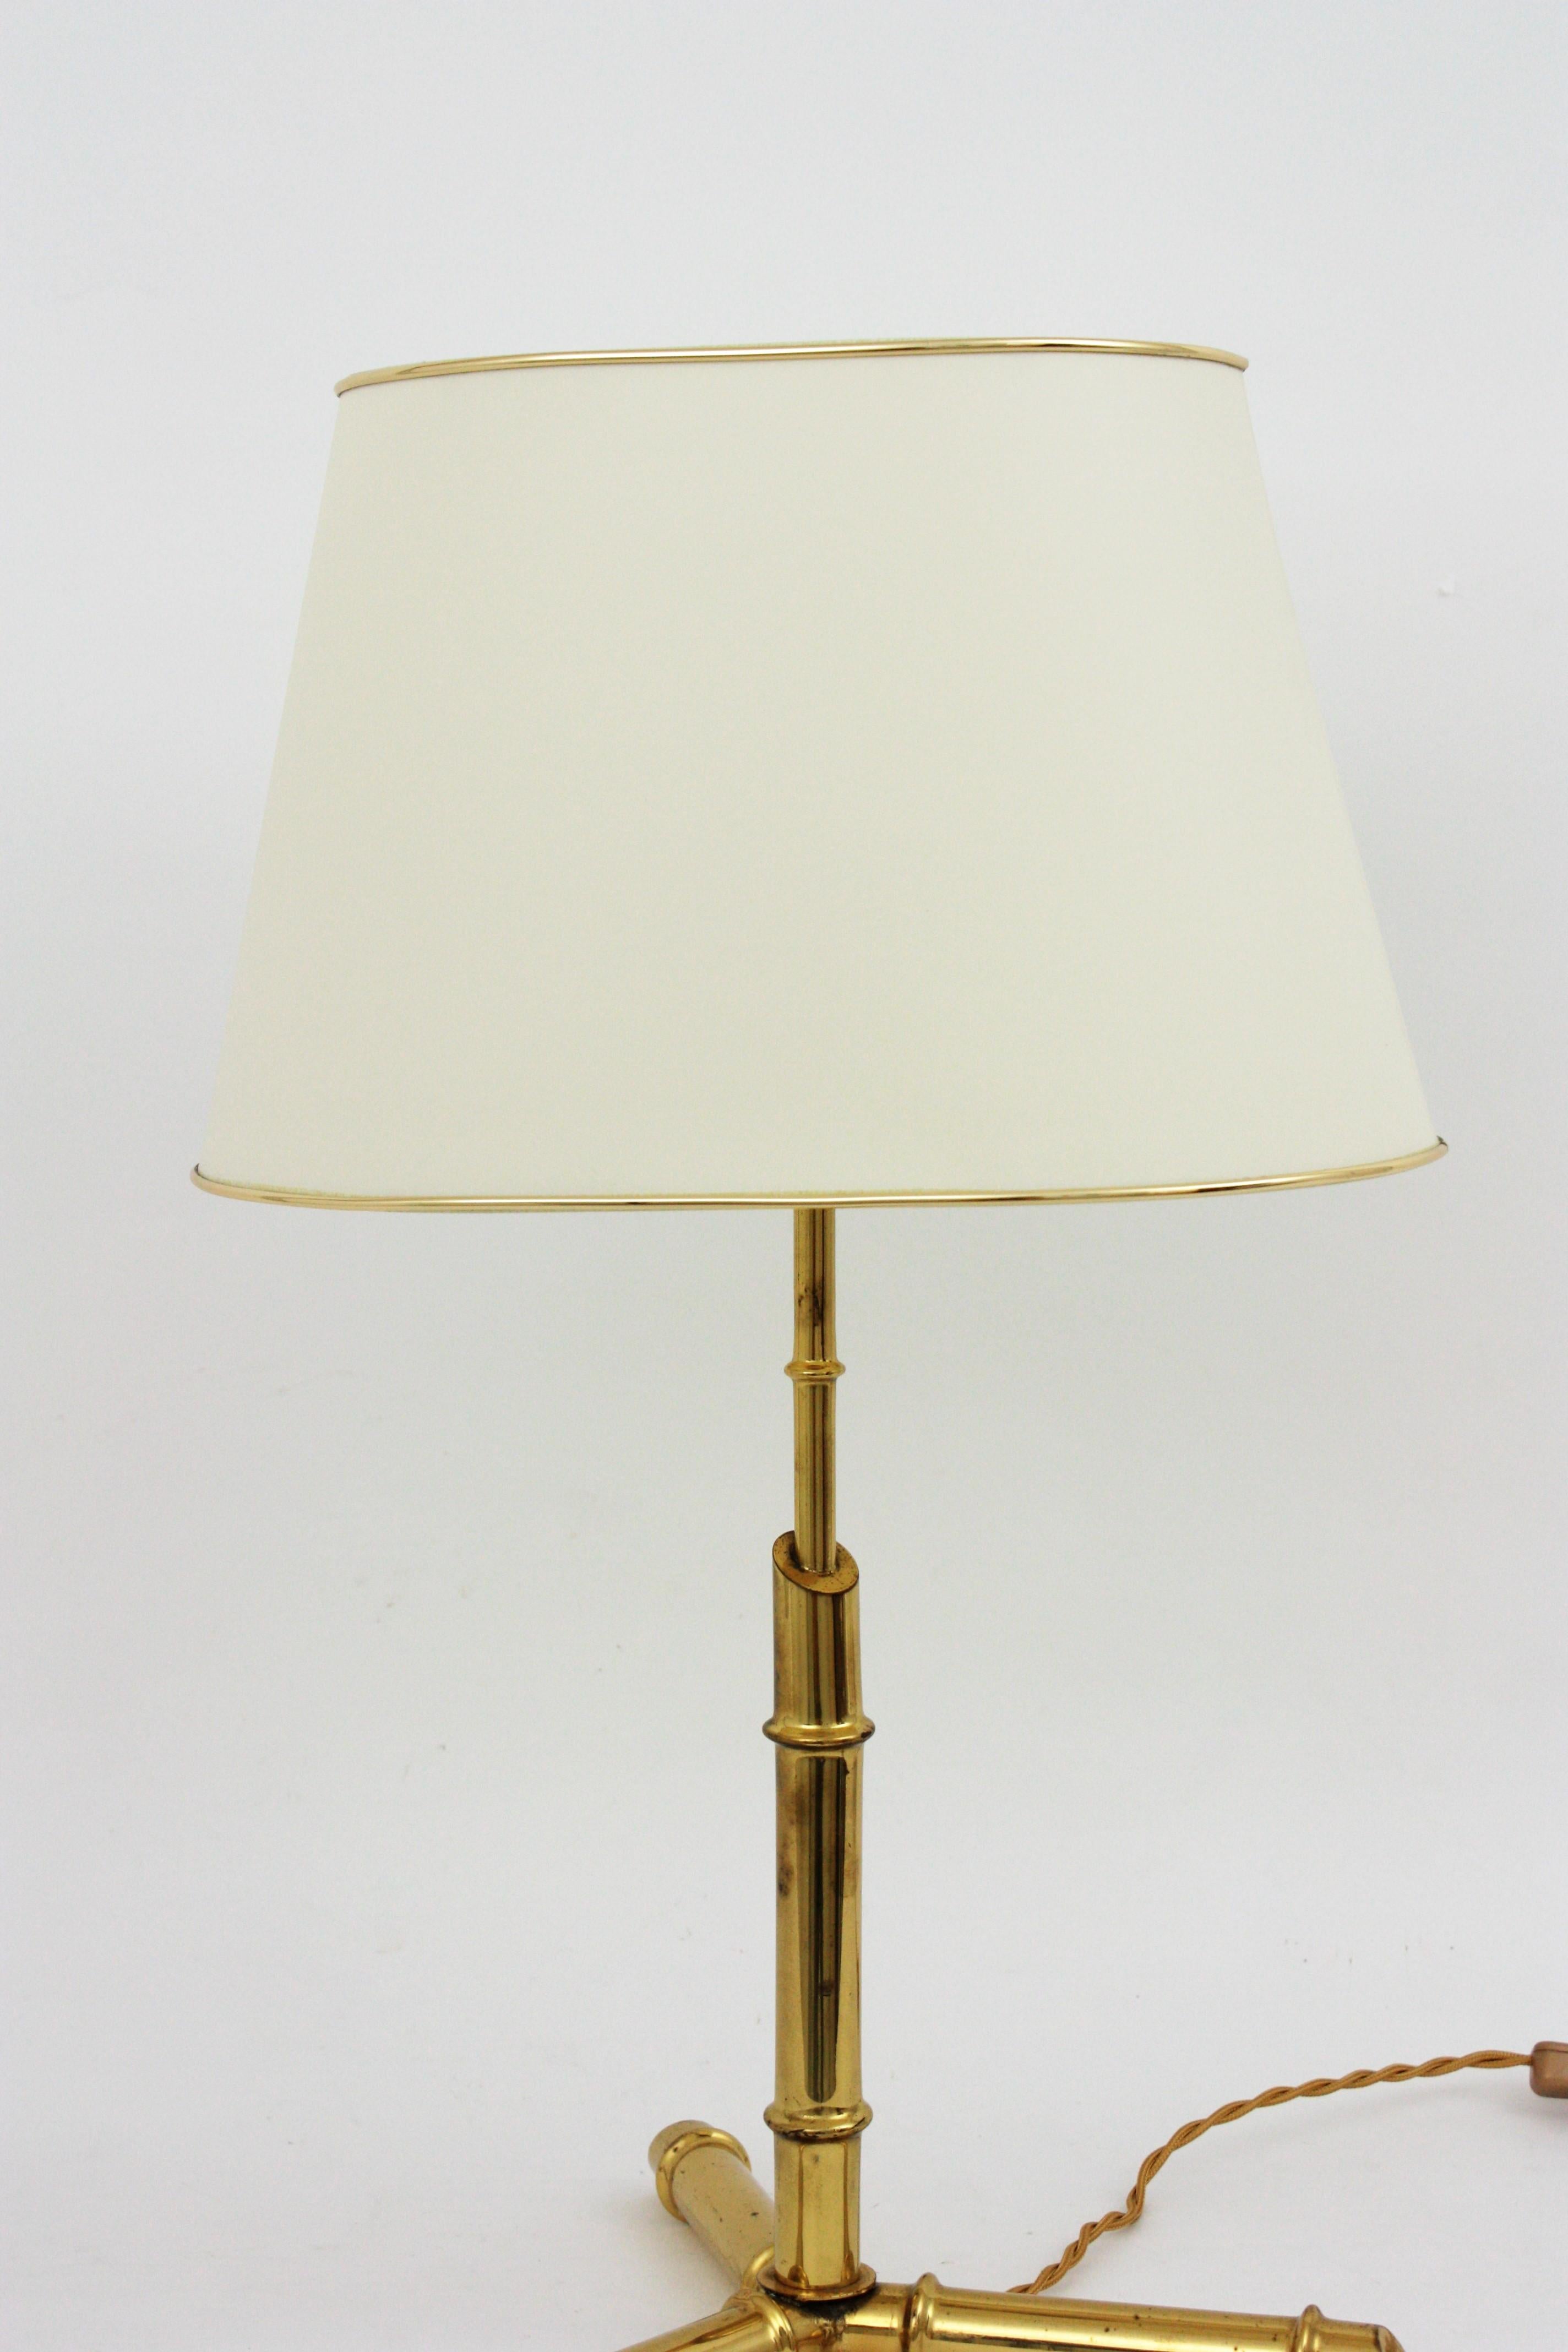 Italian Faux Bamboo Tripod Table Lamp in Brass, 1970s For Sale 3